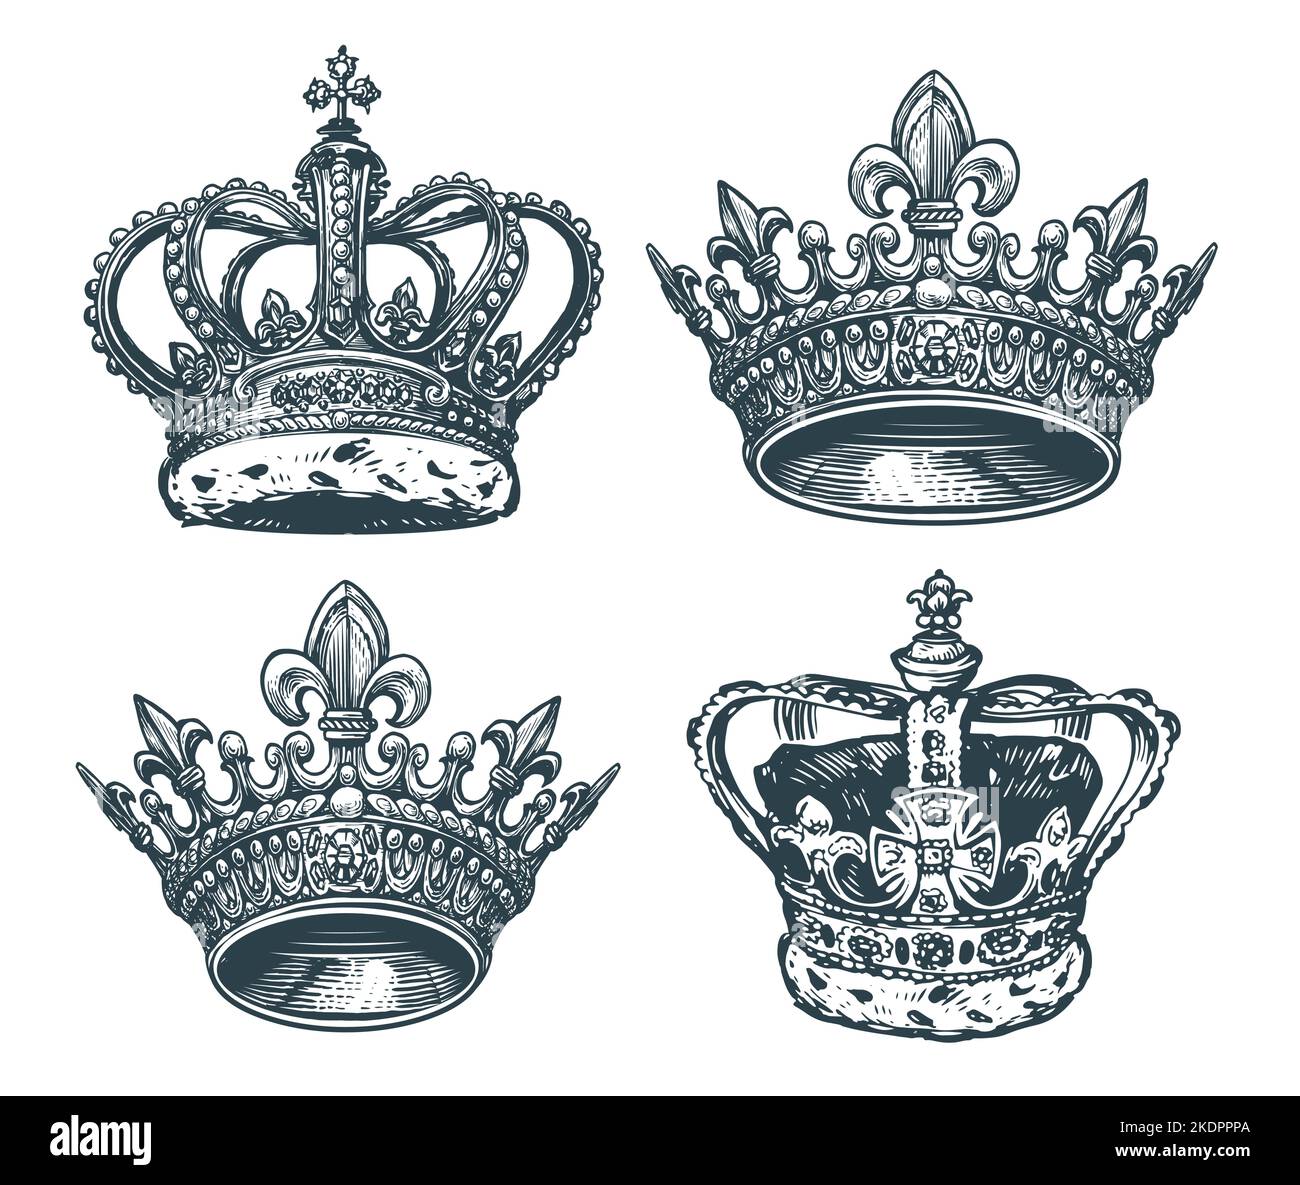 Royal golden crown with gems. King, queen symbol. Hand drawn sketch vector illustration in vintage engraving style Stock Vector